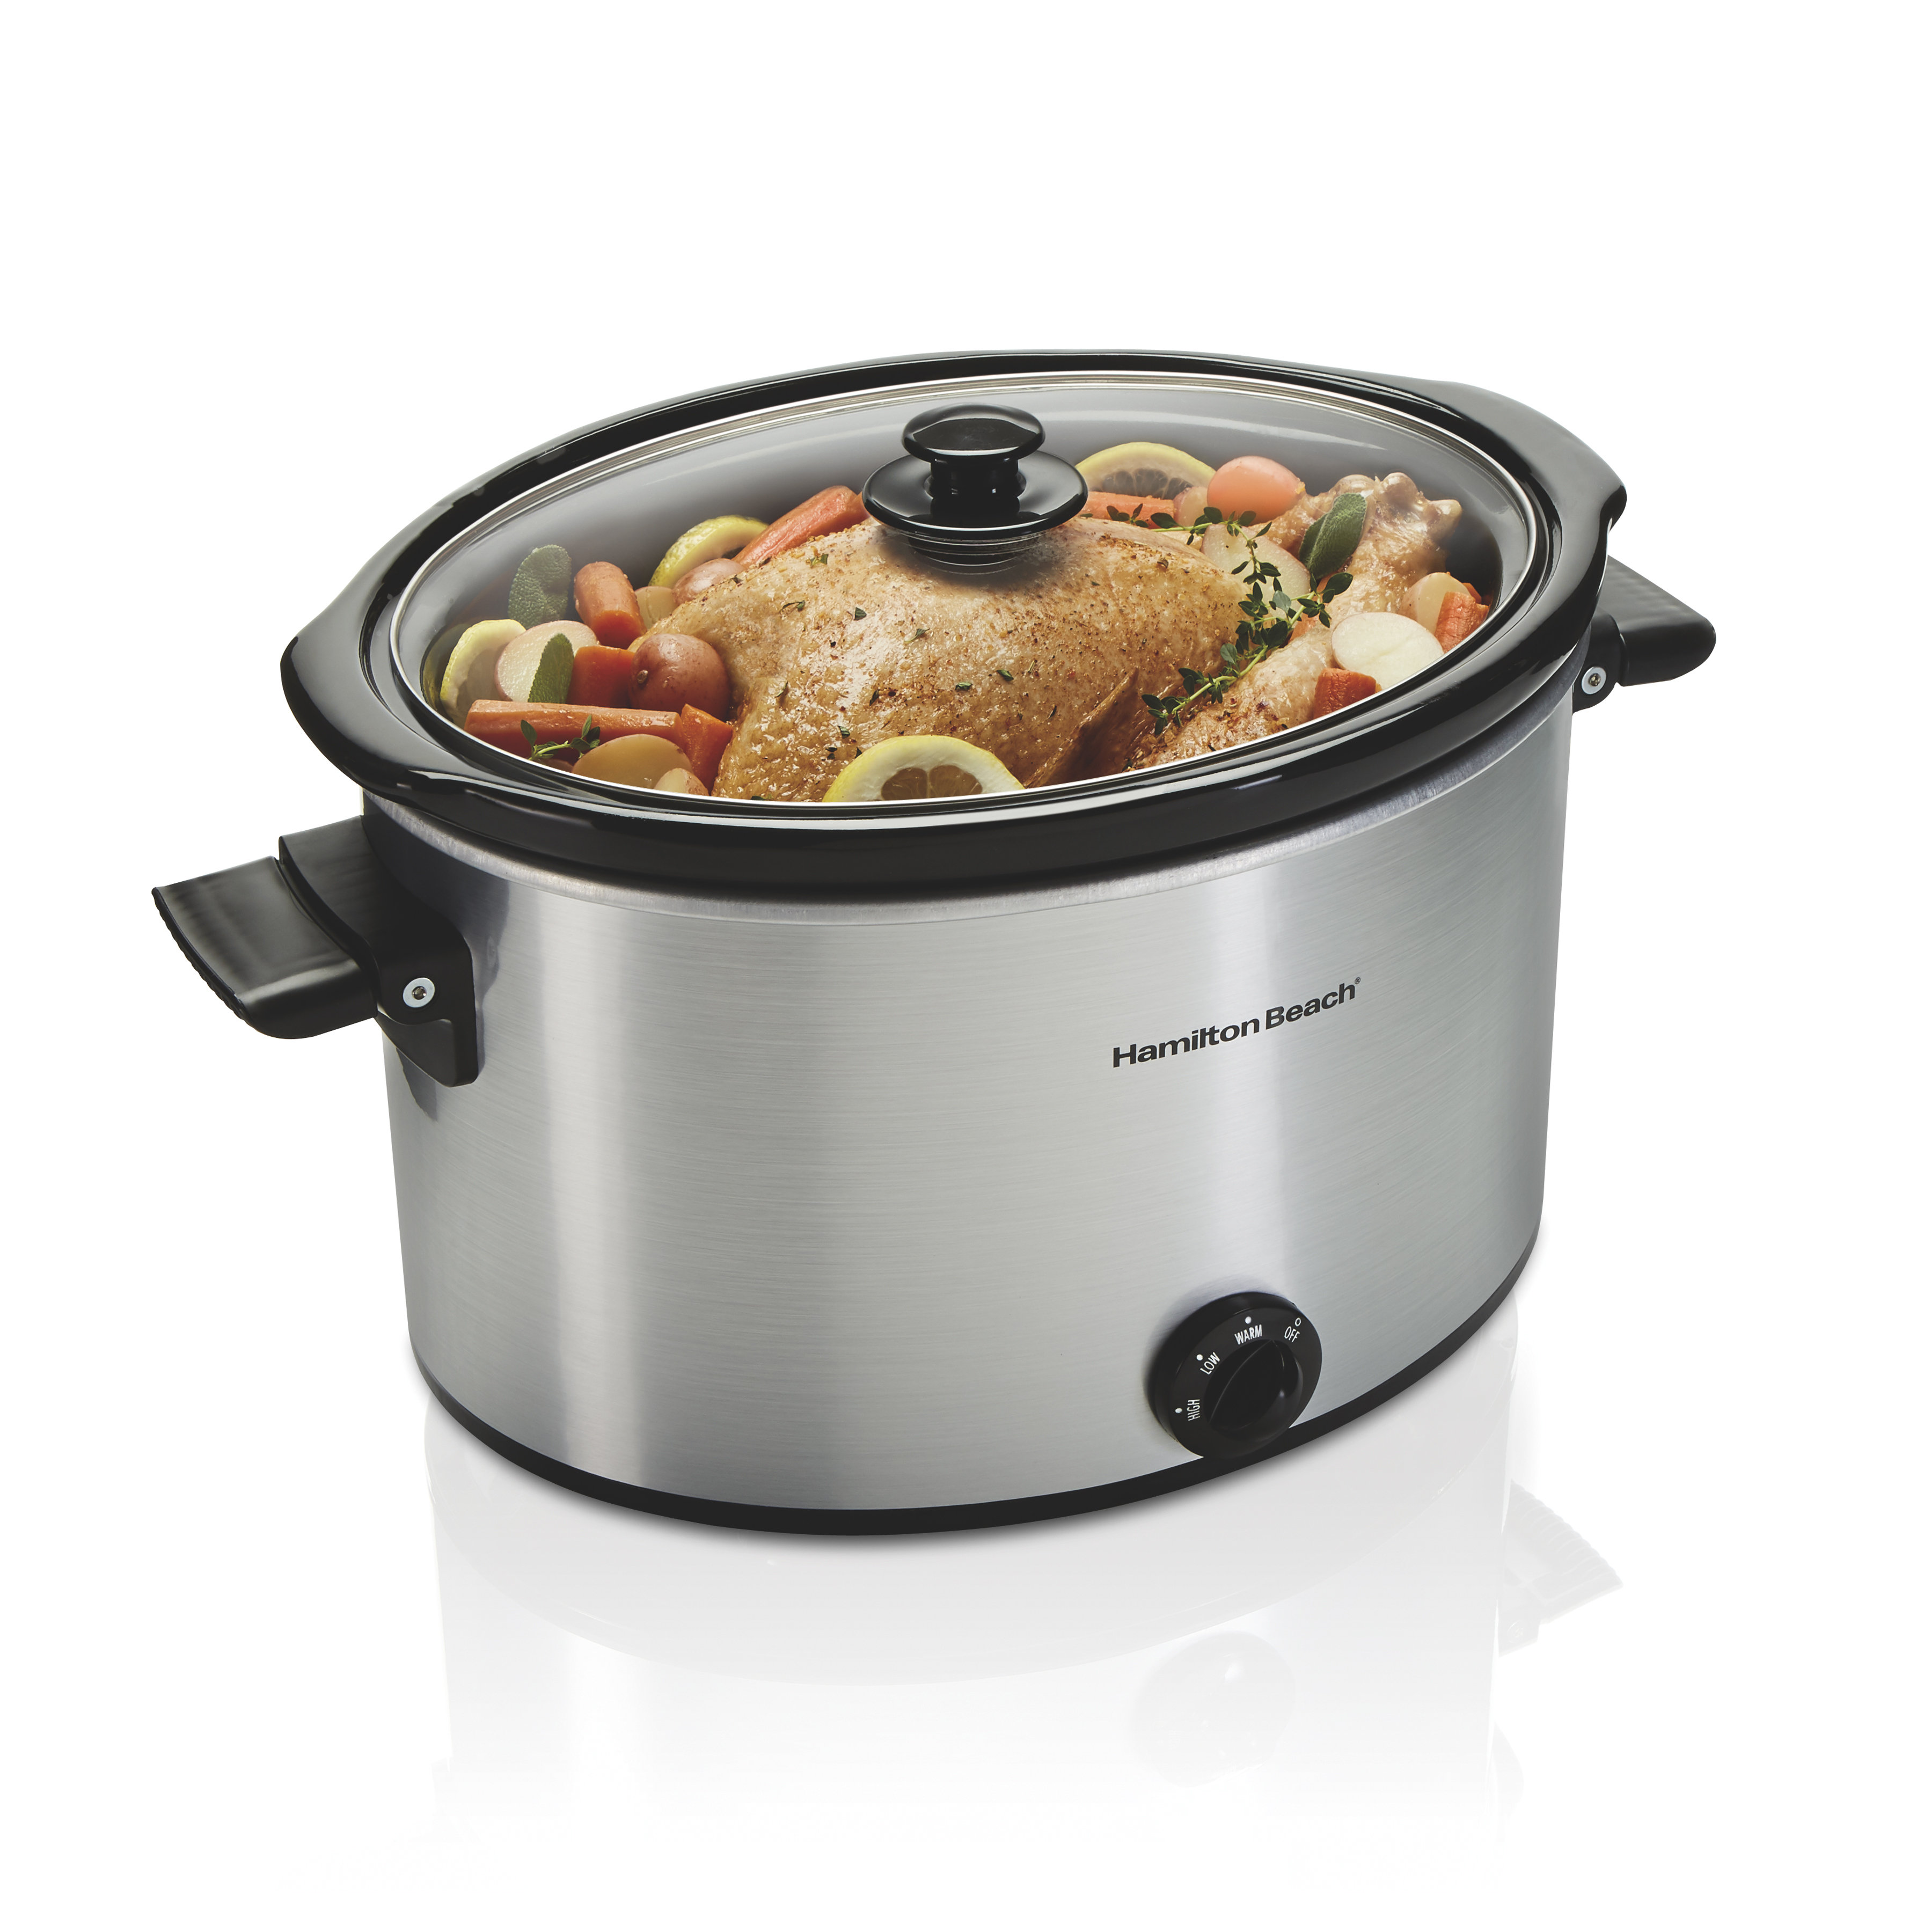 Hamilton Beach 2 in 1 6 qt. Stainless Steel Slow Cooker with Air Fry Lid, Silver